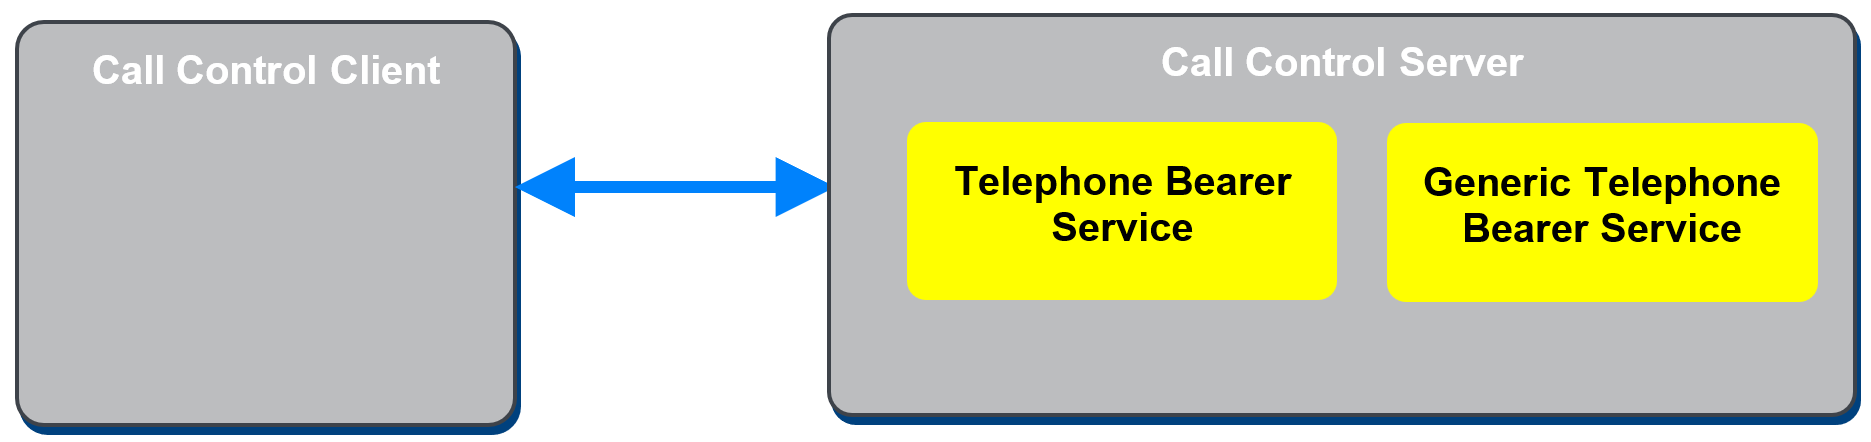 Figure 2.1: Relationship between services and profile roles